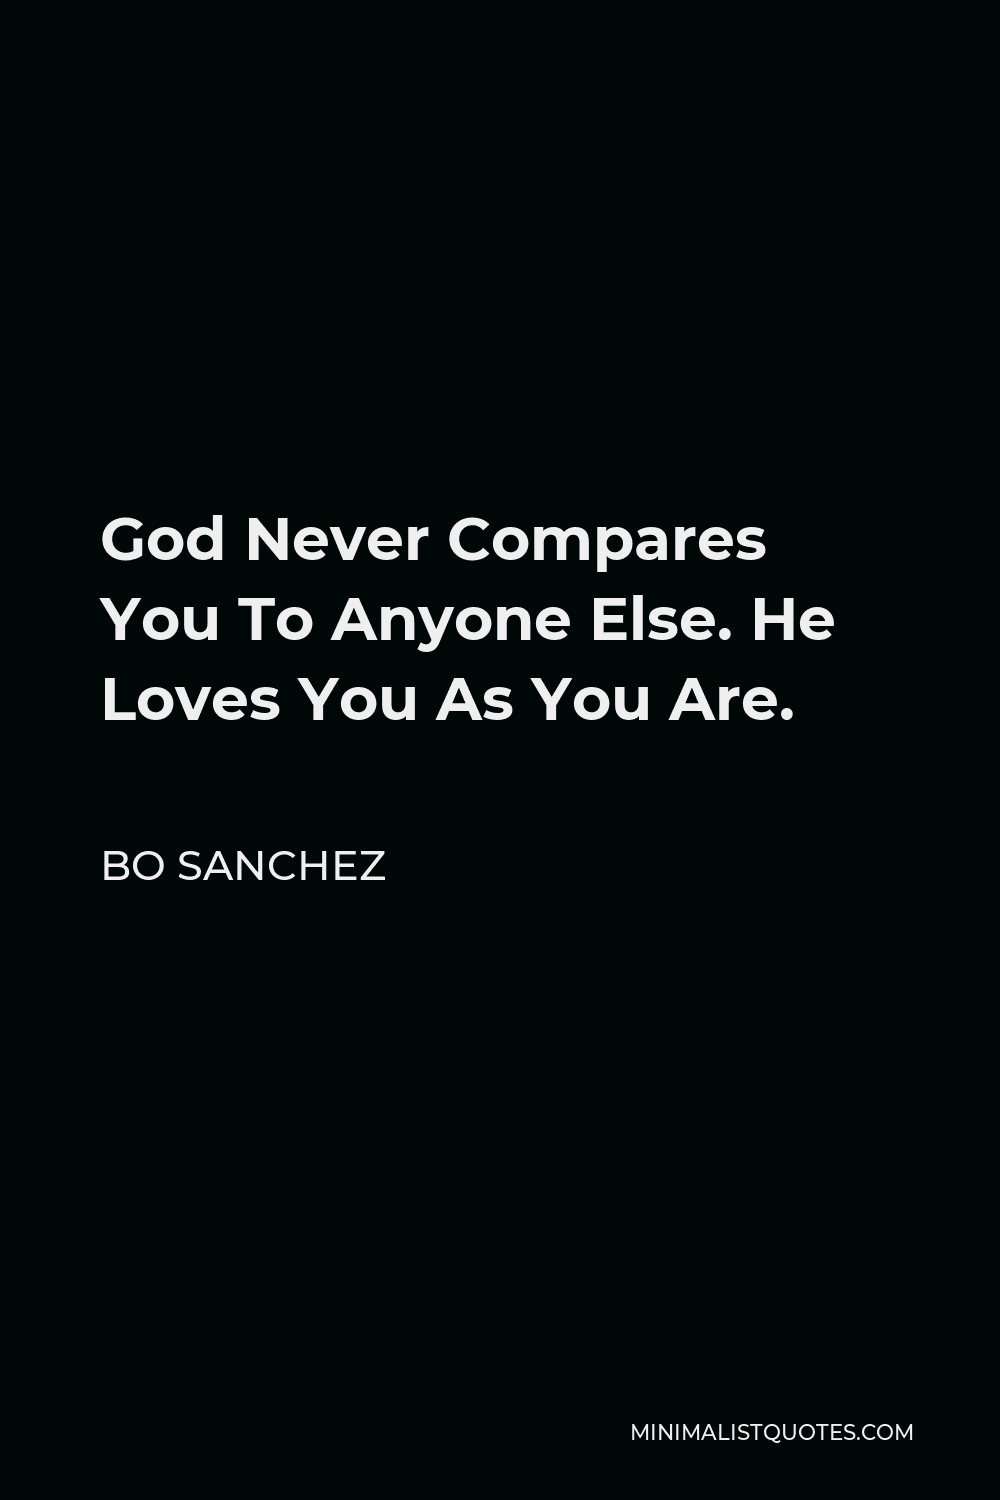 Bo Sanchez Quote - God Never Compares You To Anyone Else. He Loves You As You Are.